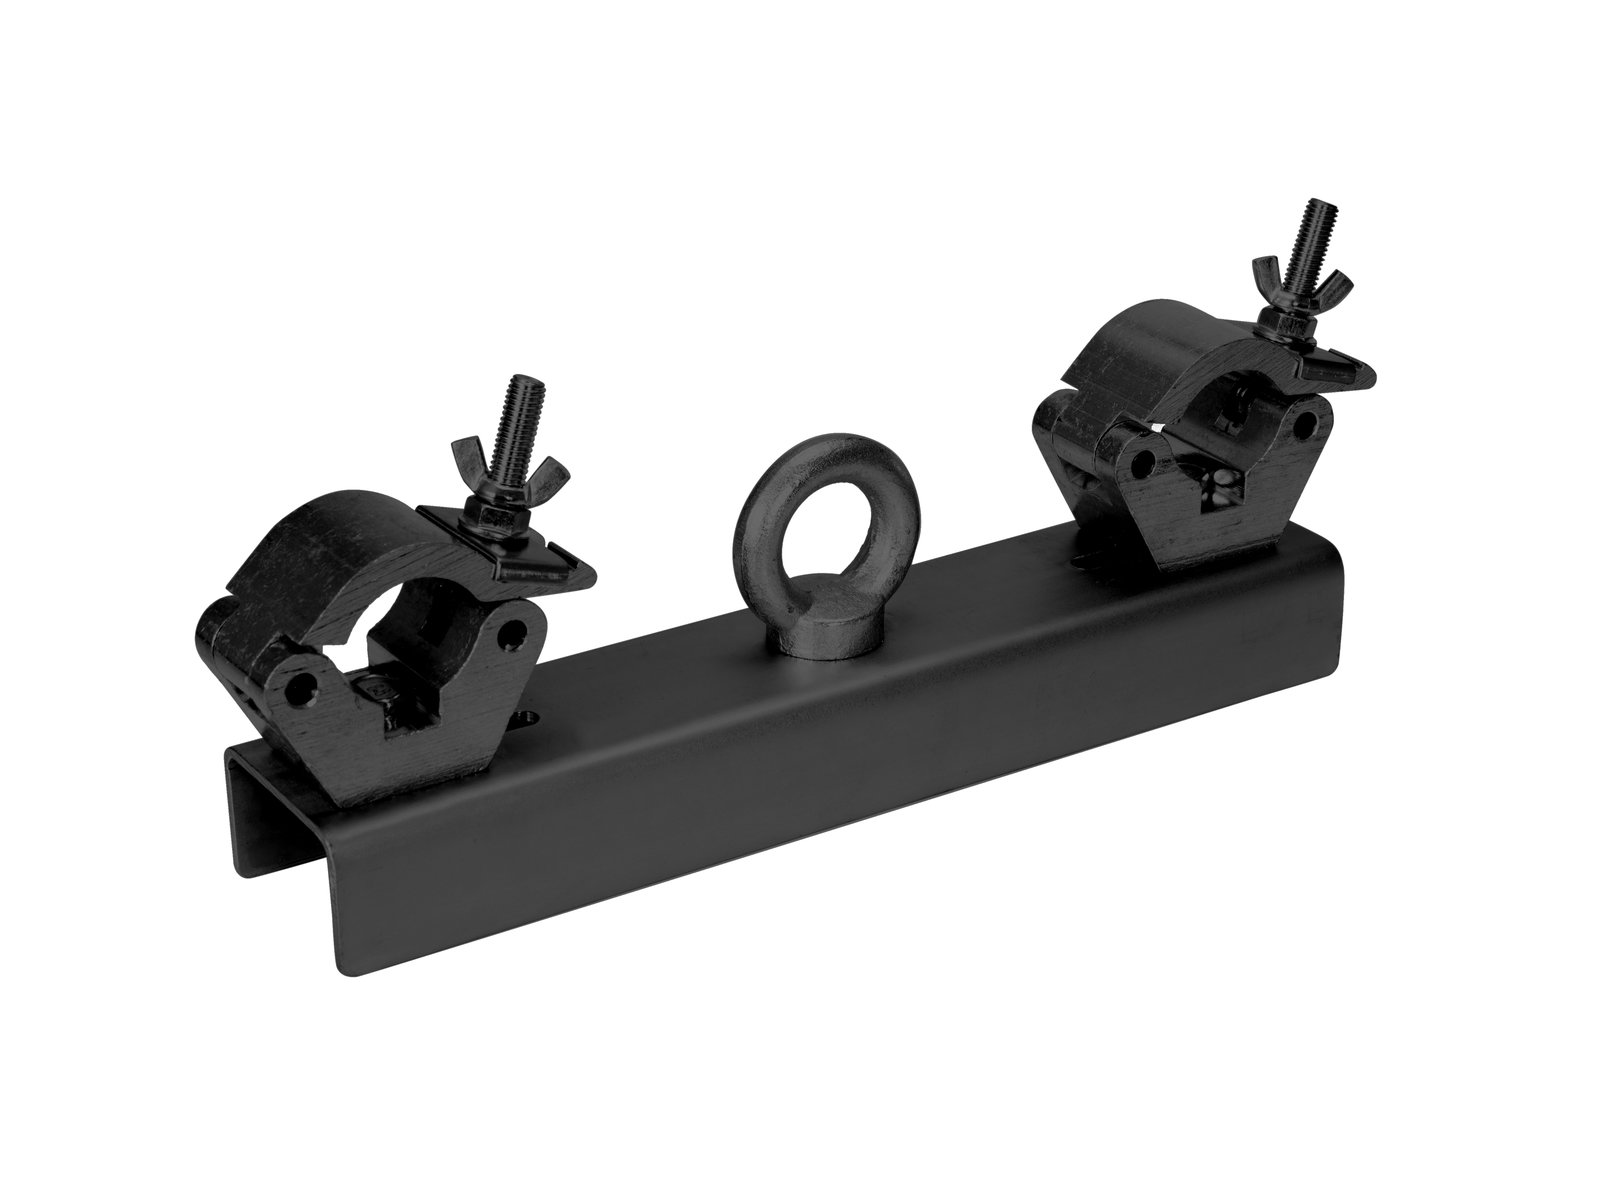 ALUTRUSS Gizmo/Clamps Truss Adapter black